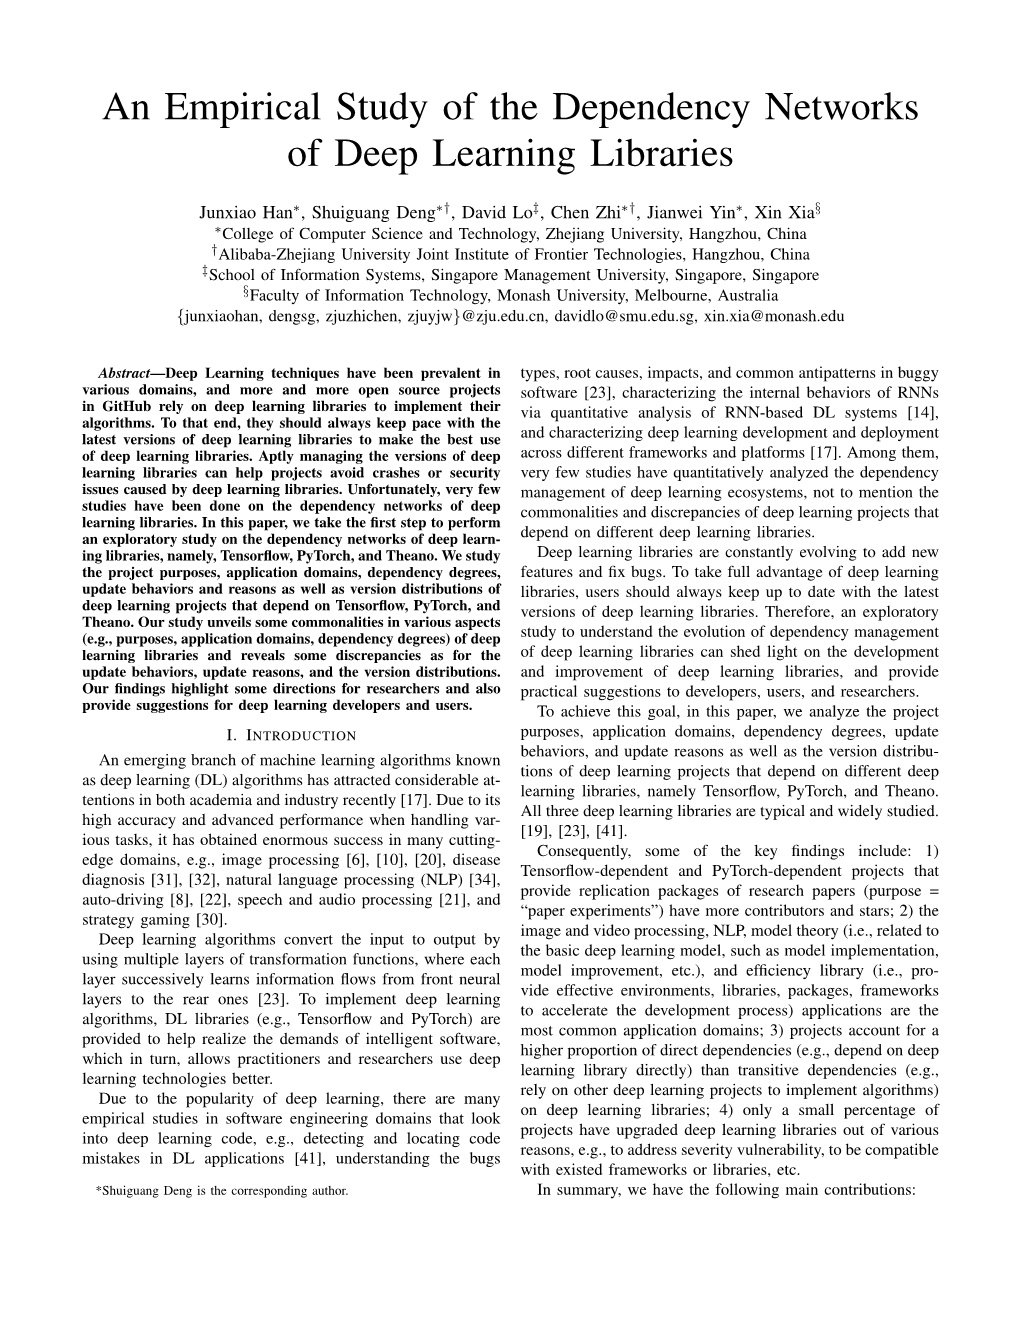 An Empirical Study of the Dependency Networks of Deep Learning Libraries